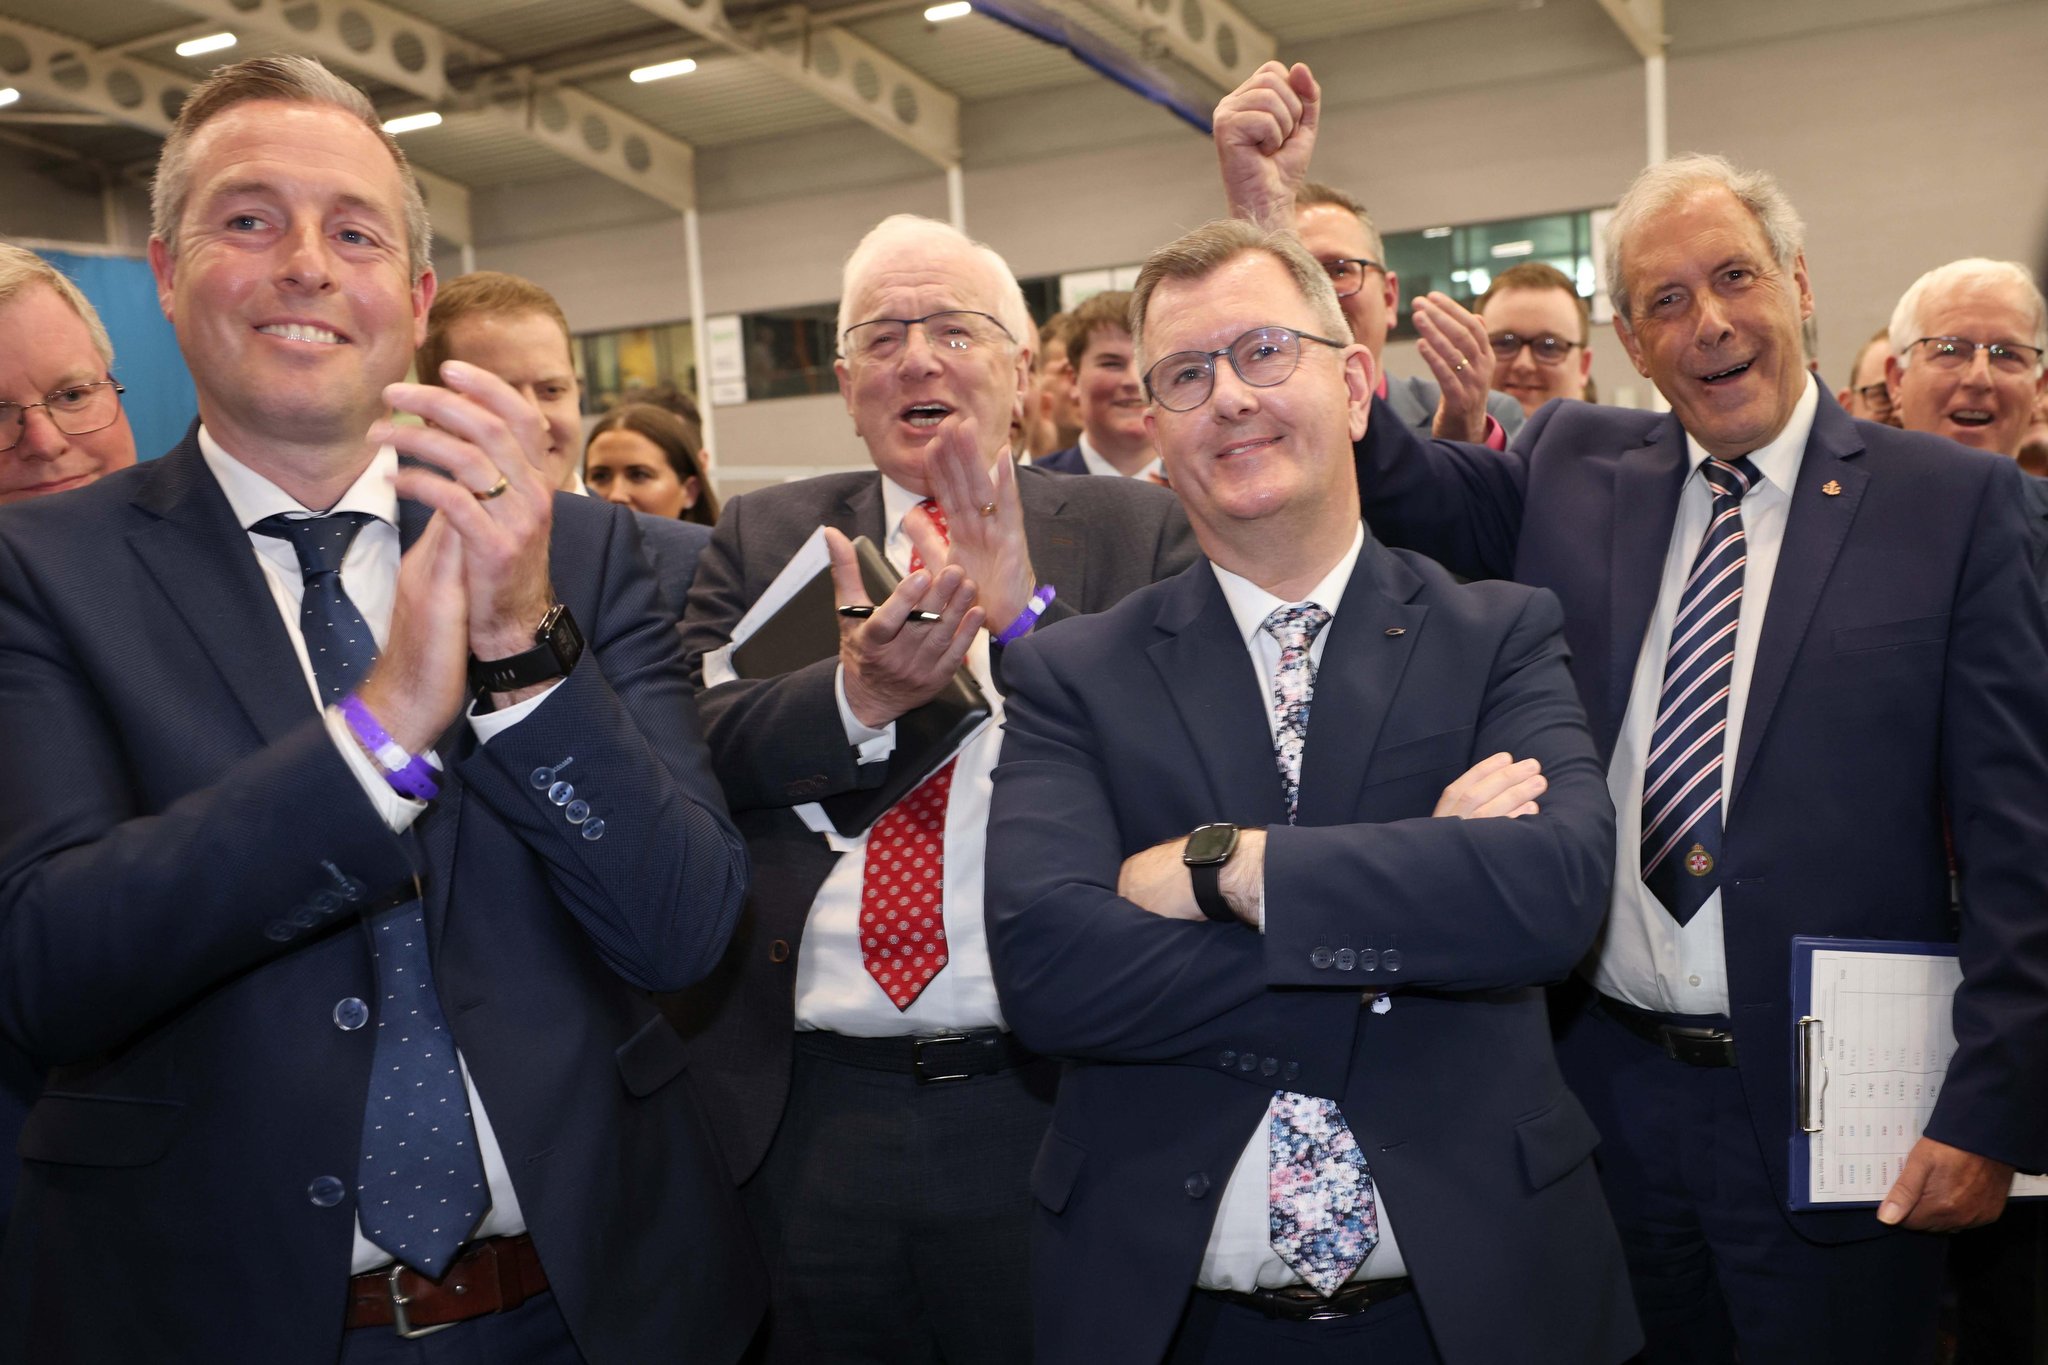 ELECTION 2022: Lagan Valley – Donaldson storms home with over 12,000 votes